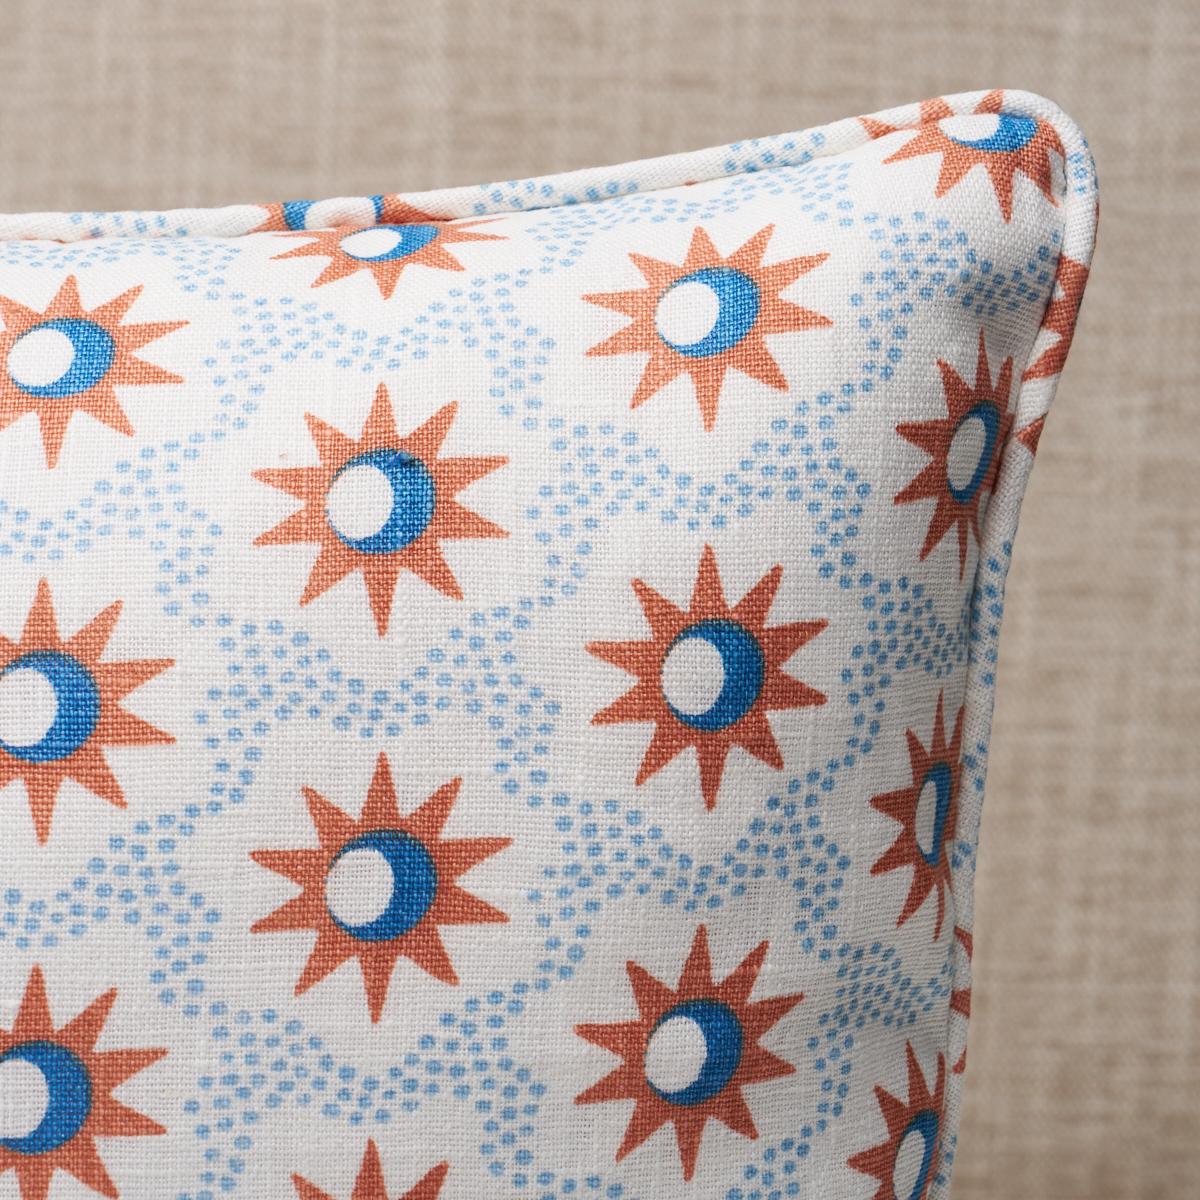 This pillow features Lucie with a self welt finish. The lively starbursts and crescent moons of Lucie fabric add celestial charm to any scheme. Pillow includes a feather/down fill insert and hidden zipper closure.